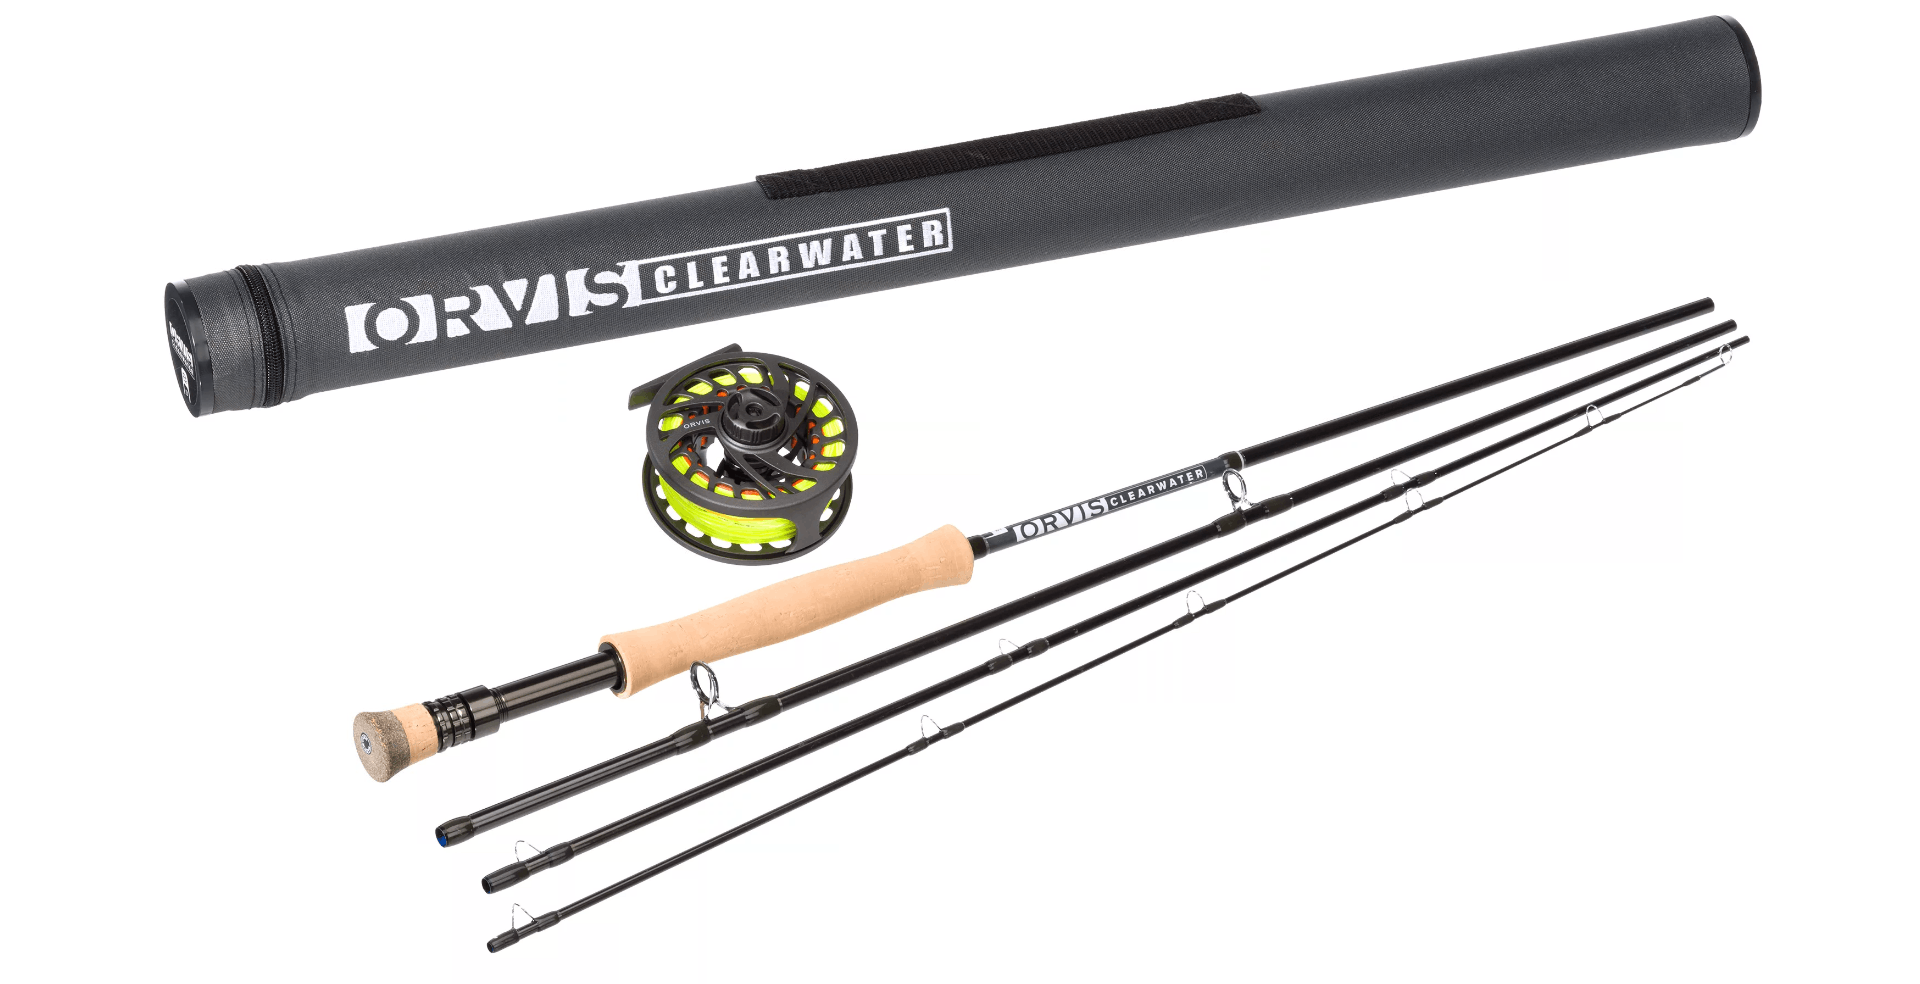 Orvis Clearwater Complete Fly Rod Outfit